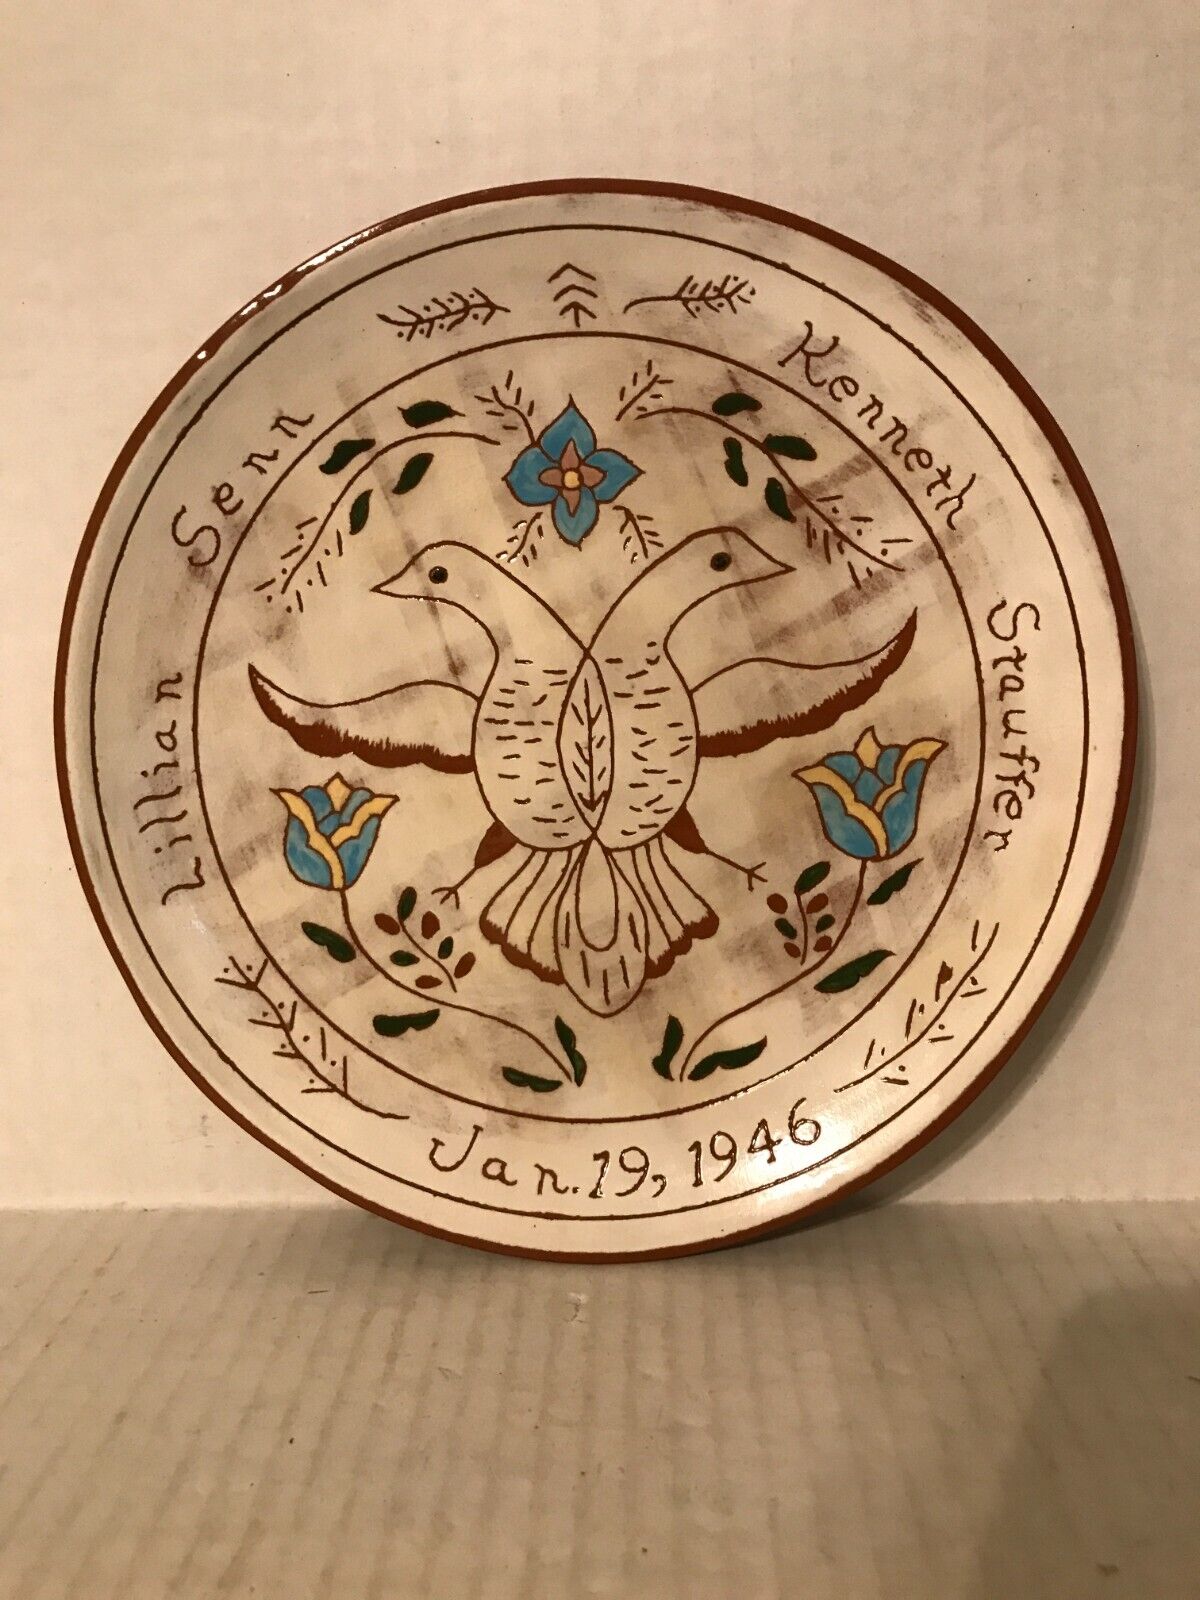 VINTAGE PENNSYLVANIA DUTCH 1946 HAND PAINTED REDWARE WEDDING  PLATE WITH DOVES